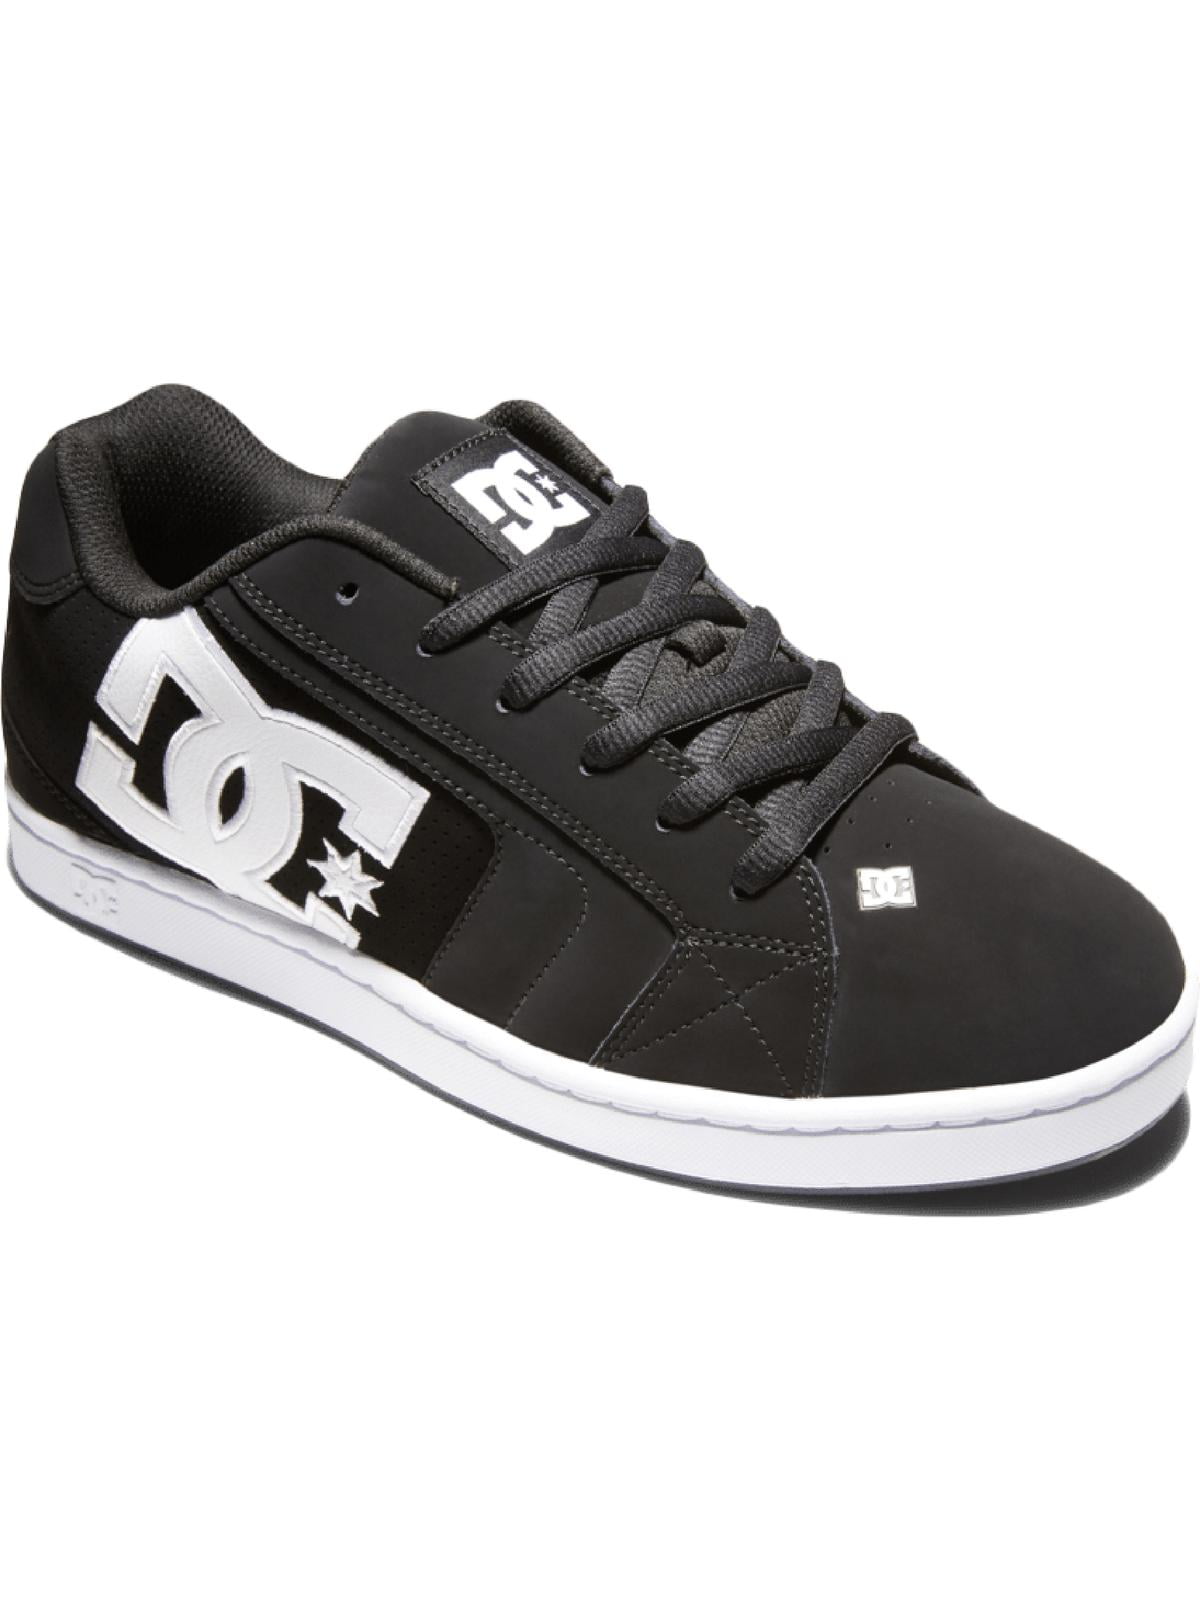 DC Shoes Mens Trase TX Textile Skateboarding Trainers Sneakers Shoes Pumps  | Fruugo US